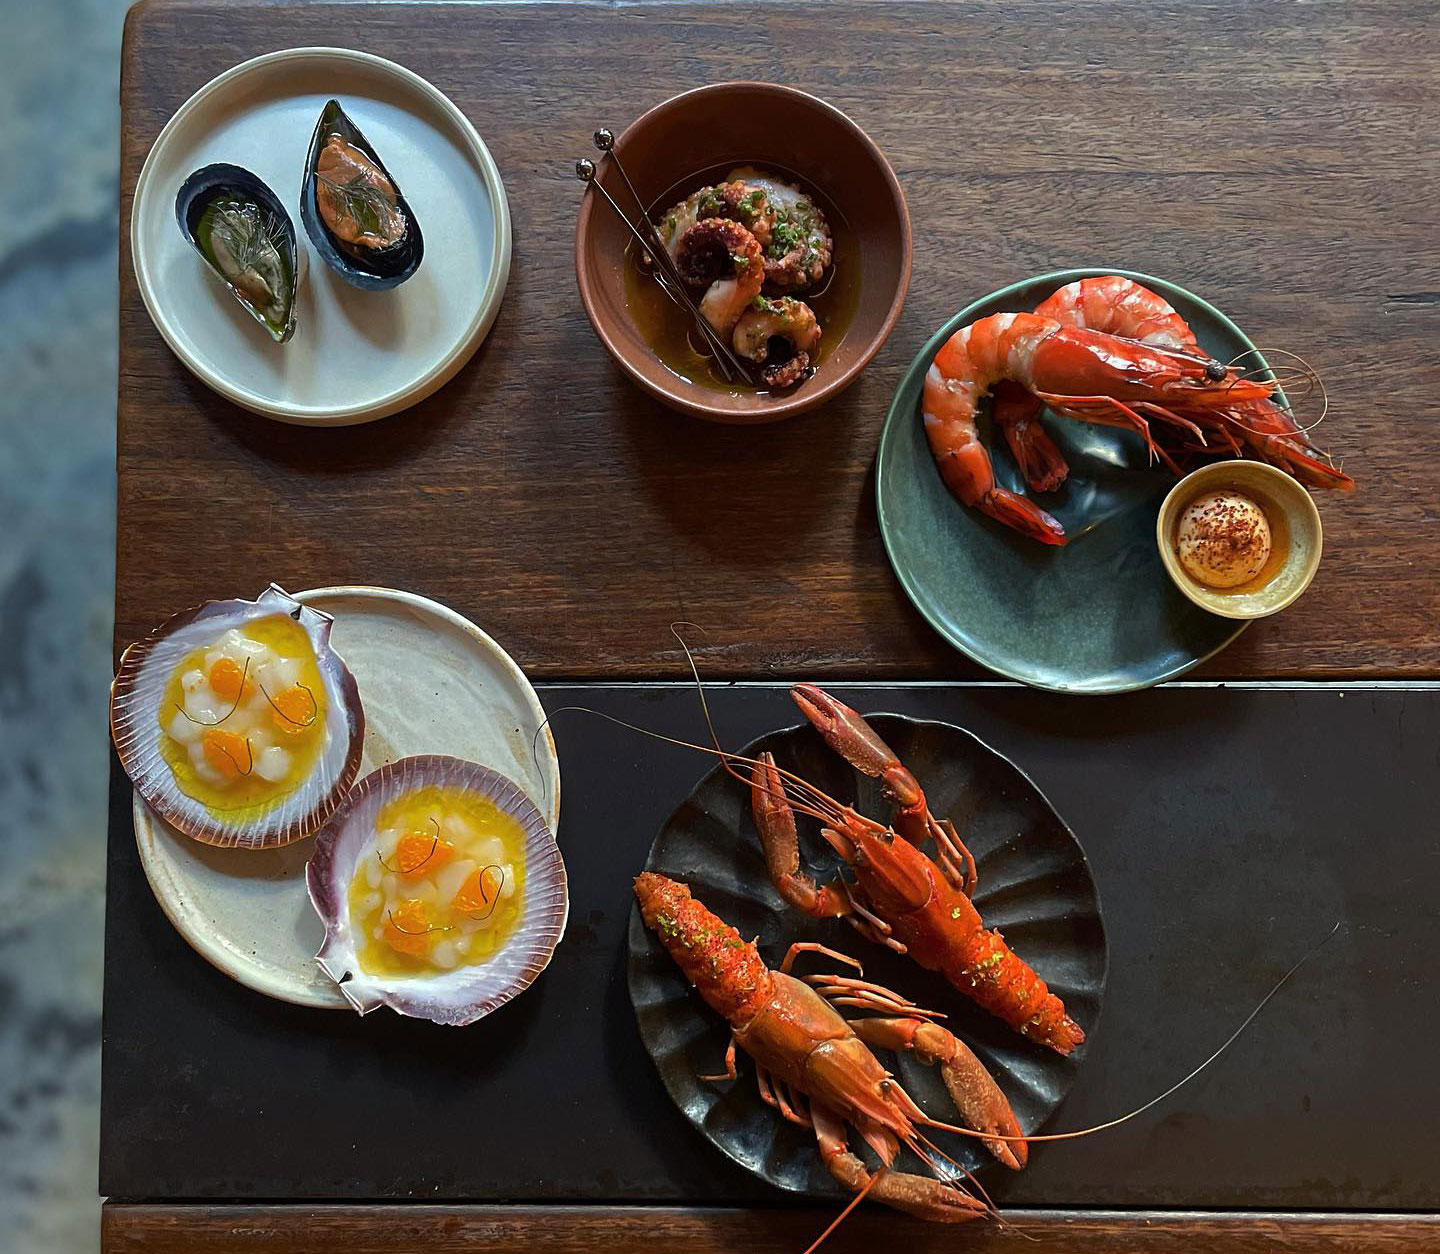 A seafood snack flight at Longshore, one of the best restaurants in Sydney